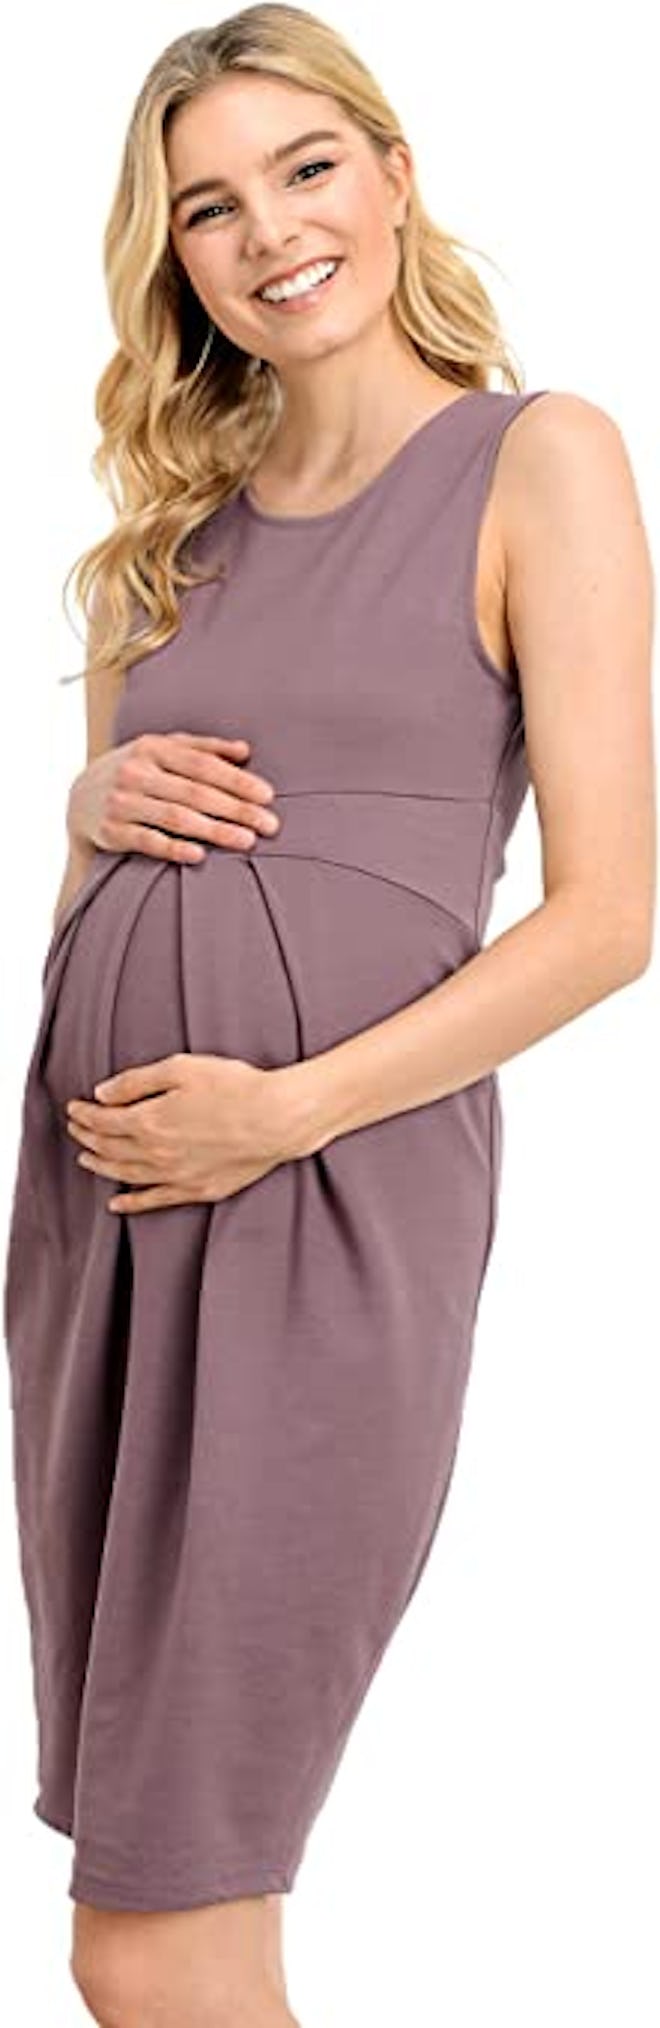 With a knee-length hem and fitted silhouette, this LaClef style is one of the best maternity dresses...